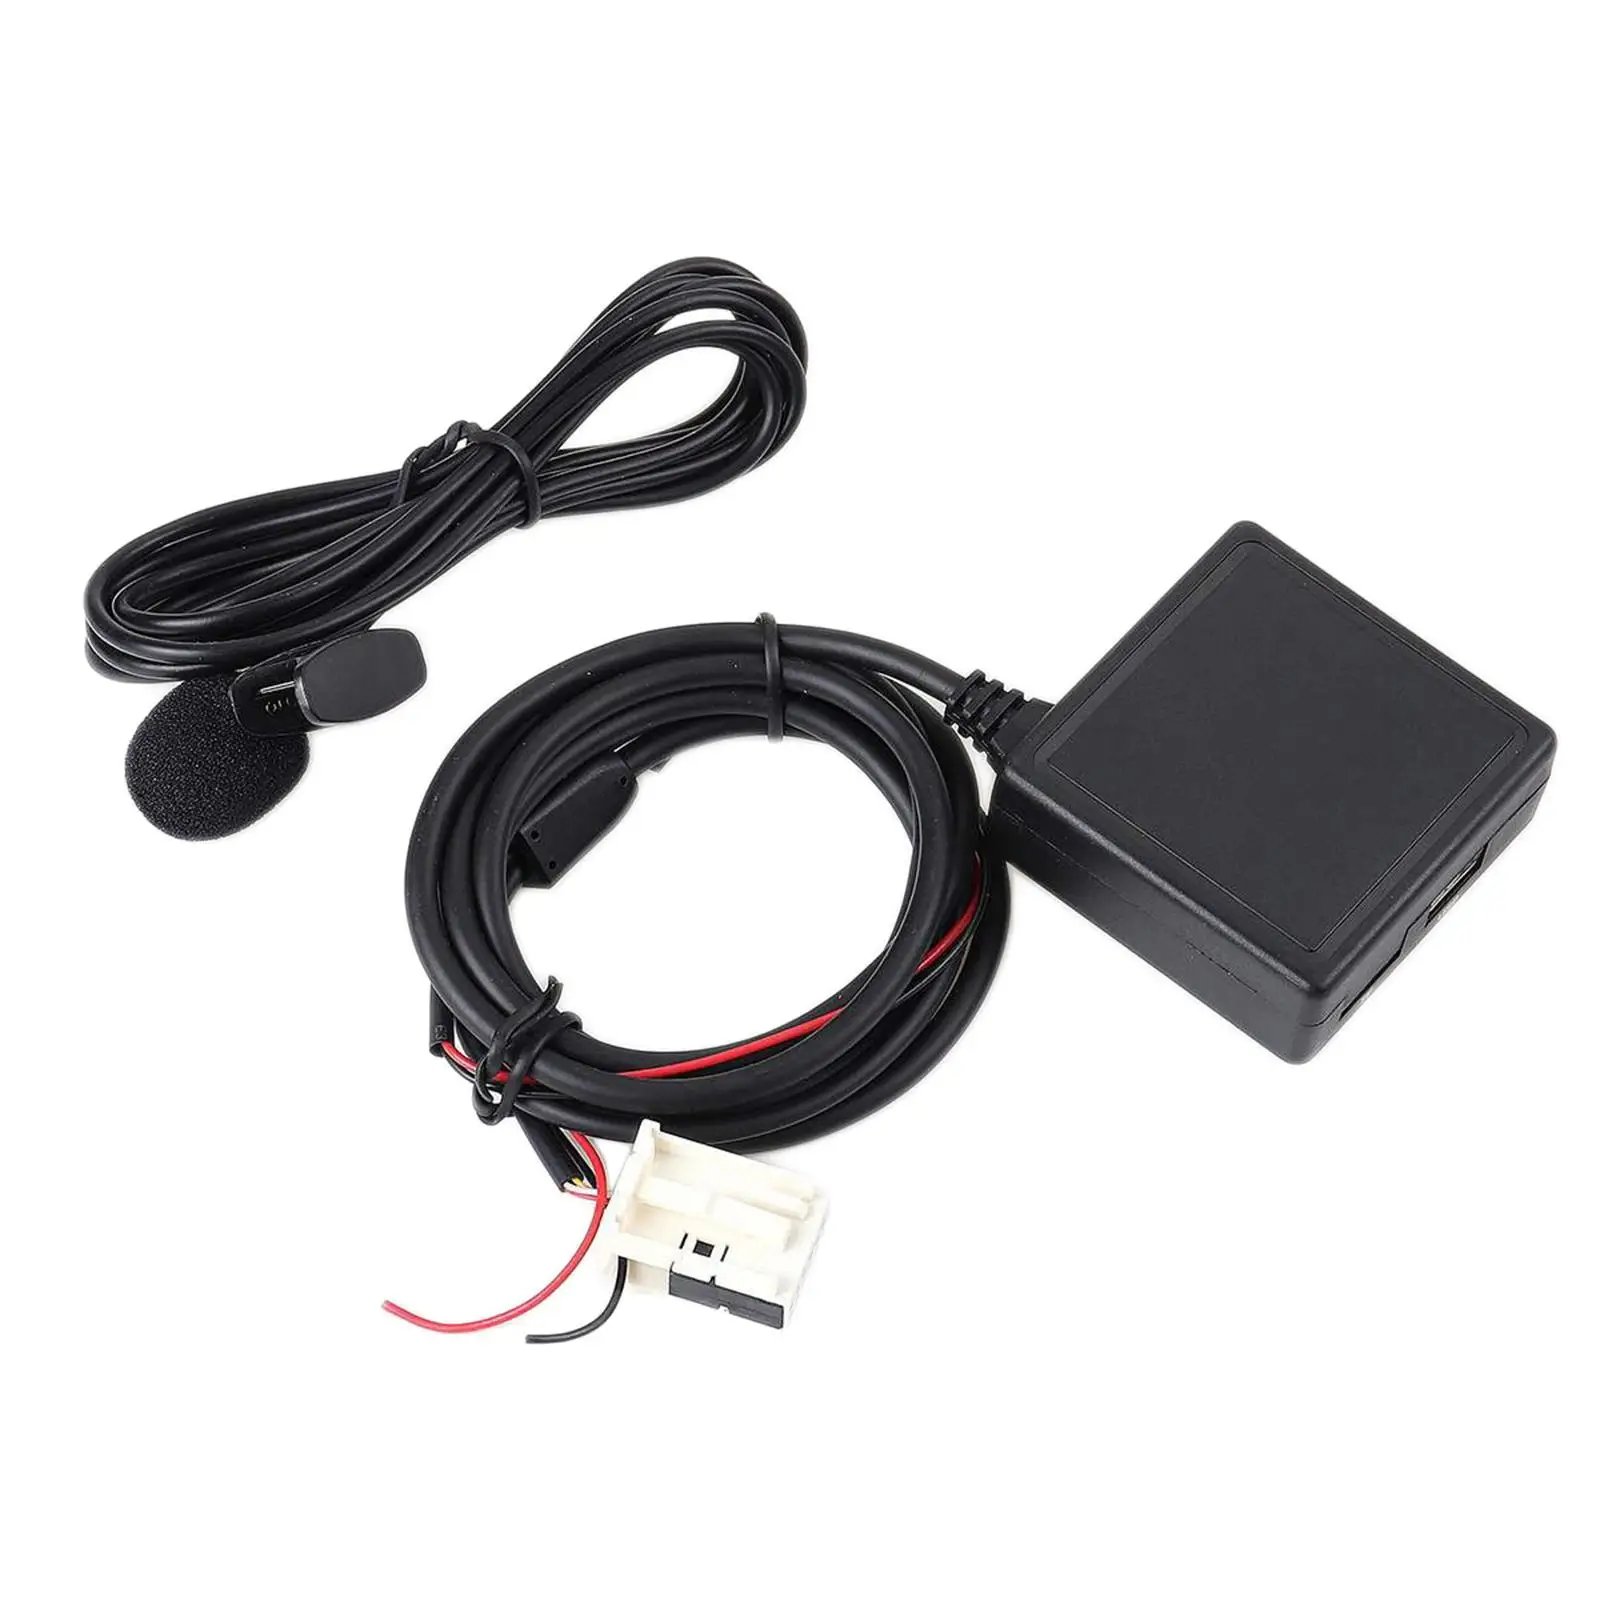 

Automotive Microphone Wireless Audio Adapter for W209 W164 W211 Easily Install Listening Music Accessories Professional